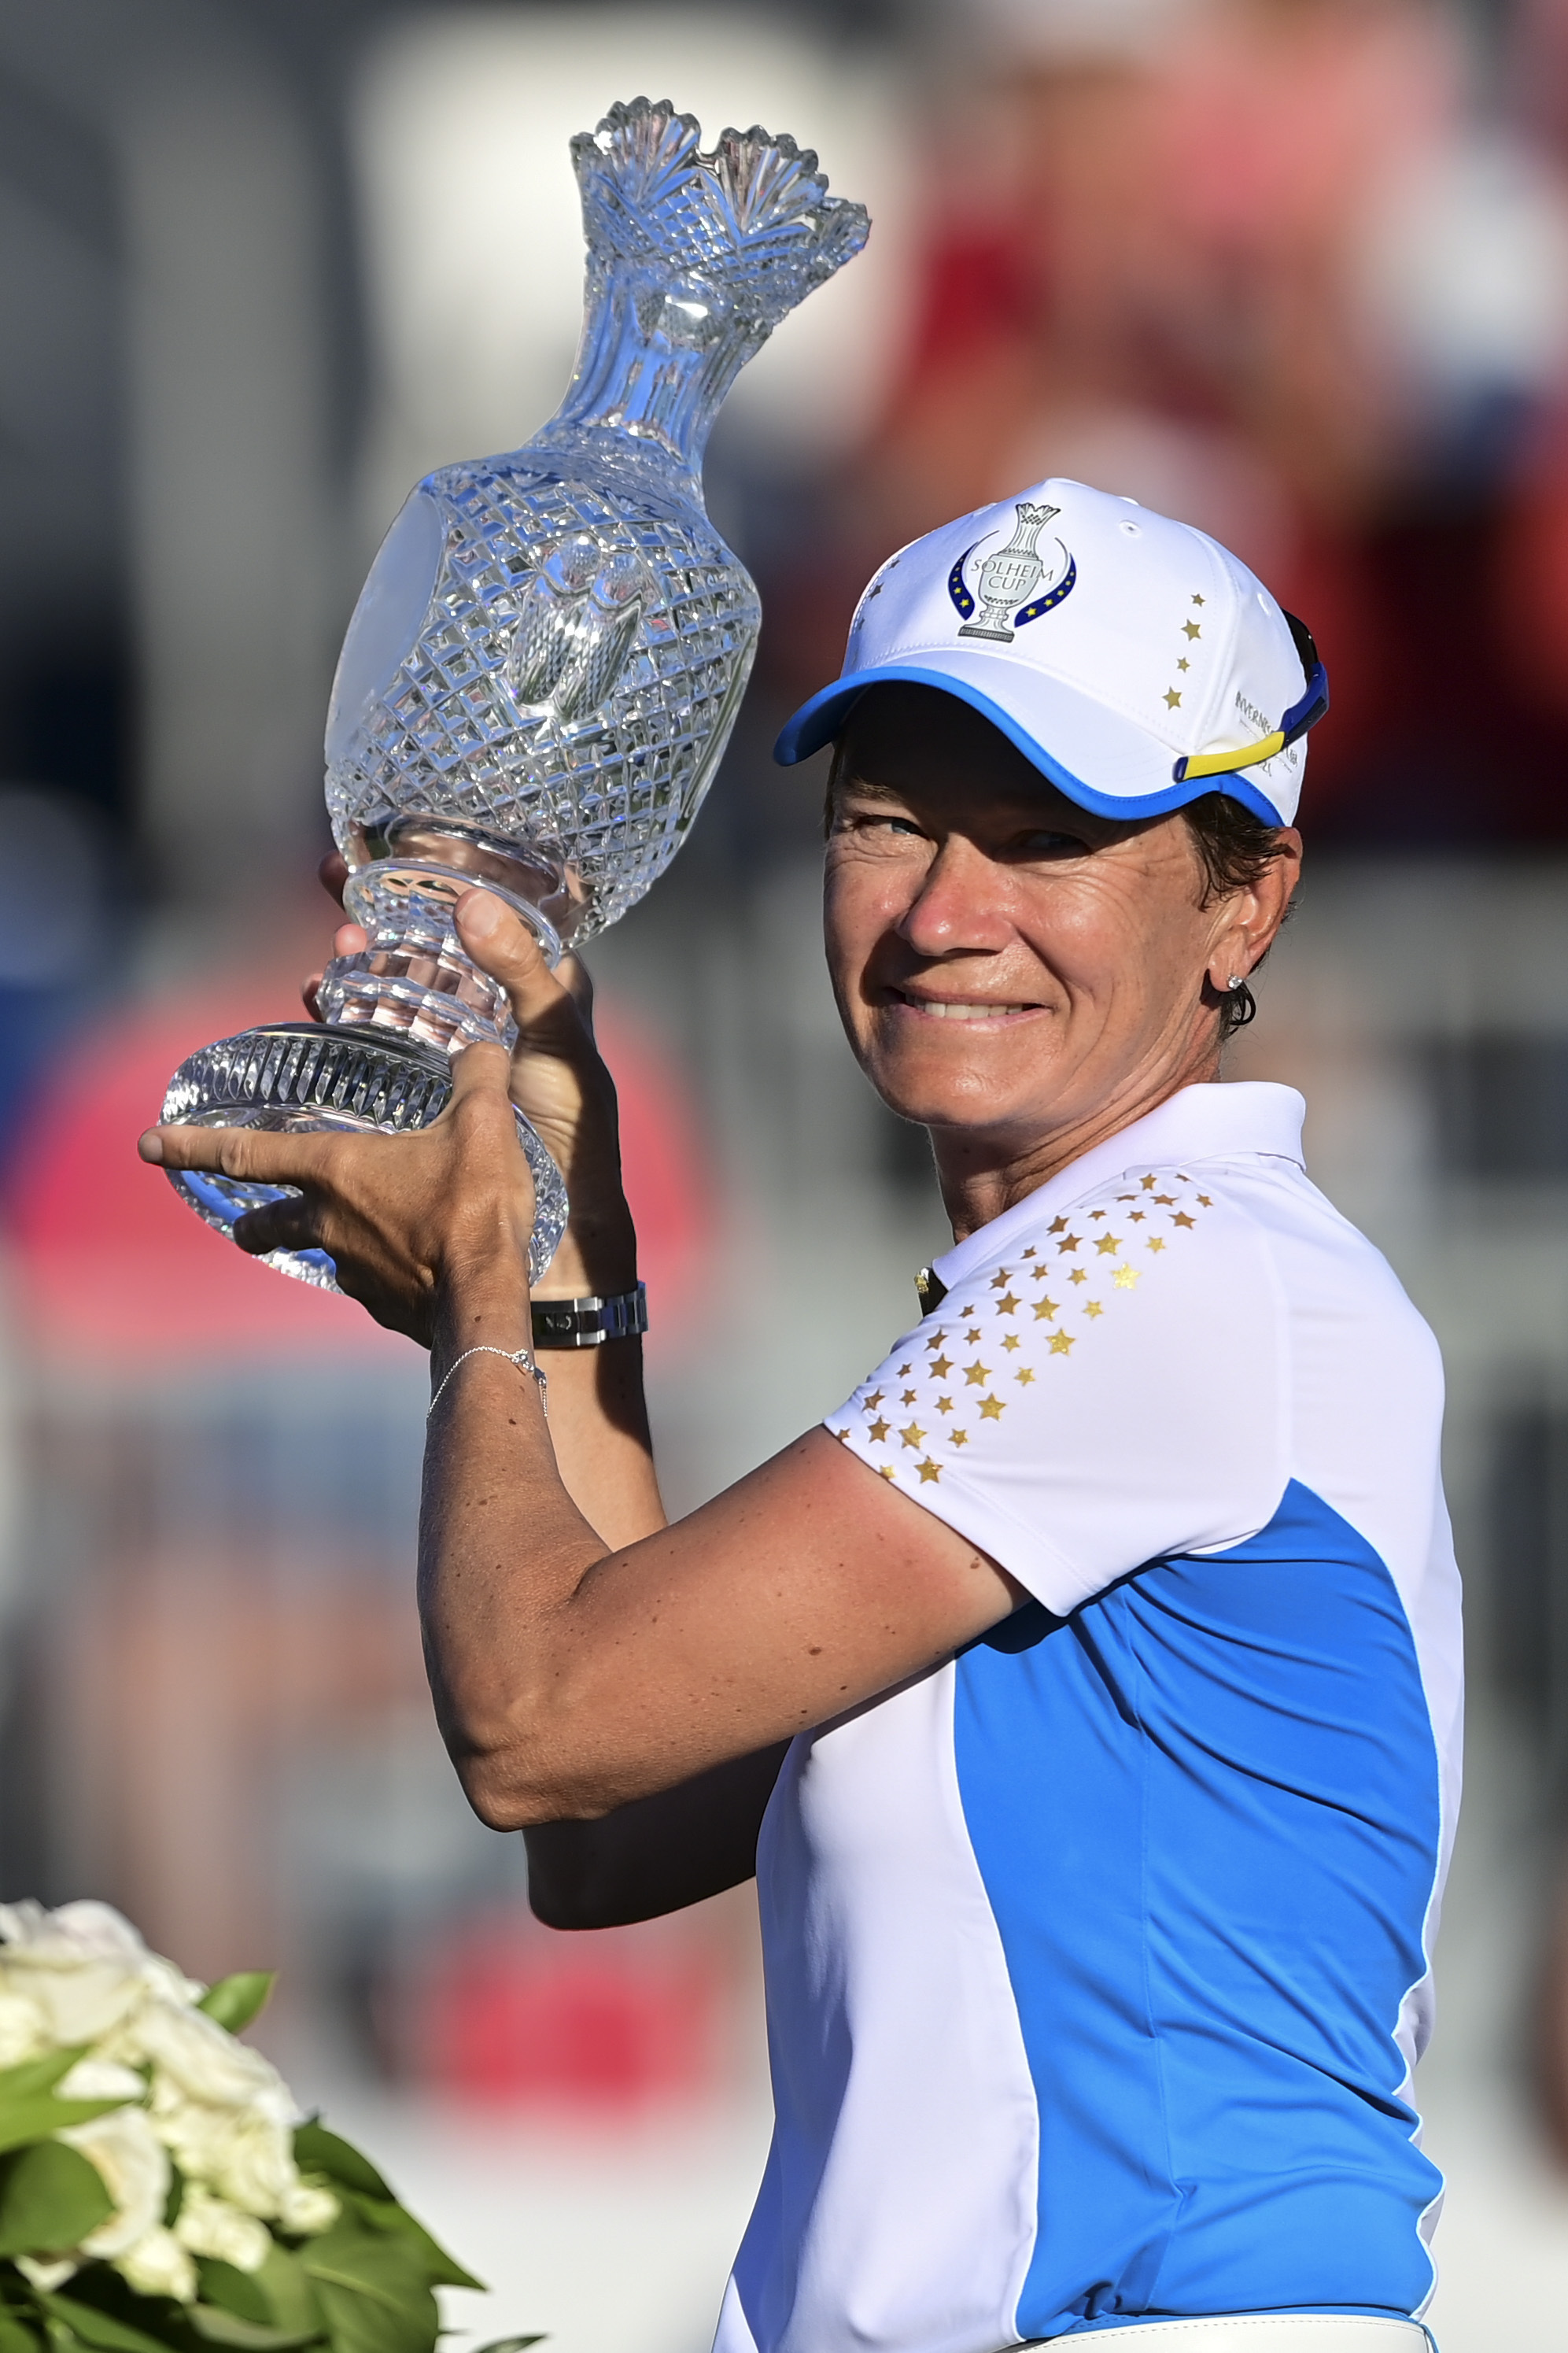 Europe Captain, Catriona Matthew holds up the trophy after defeating the United States at the Solheim Cup golf tournament, Monday, Sept. 6, 2021, in Toledo, Ohio. (AP Photo/David Dermer).